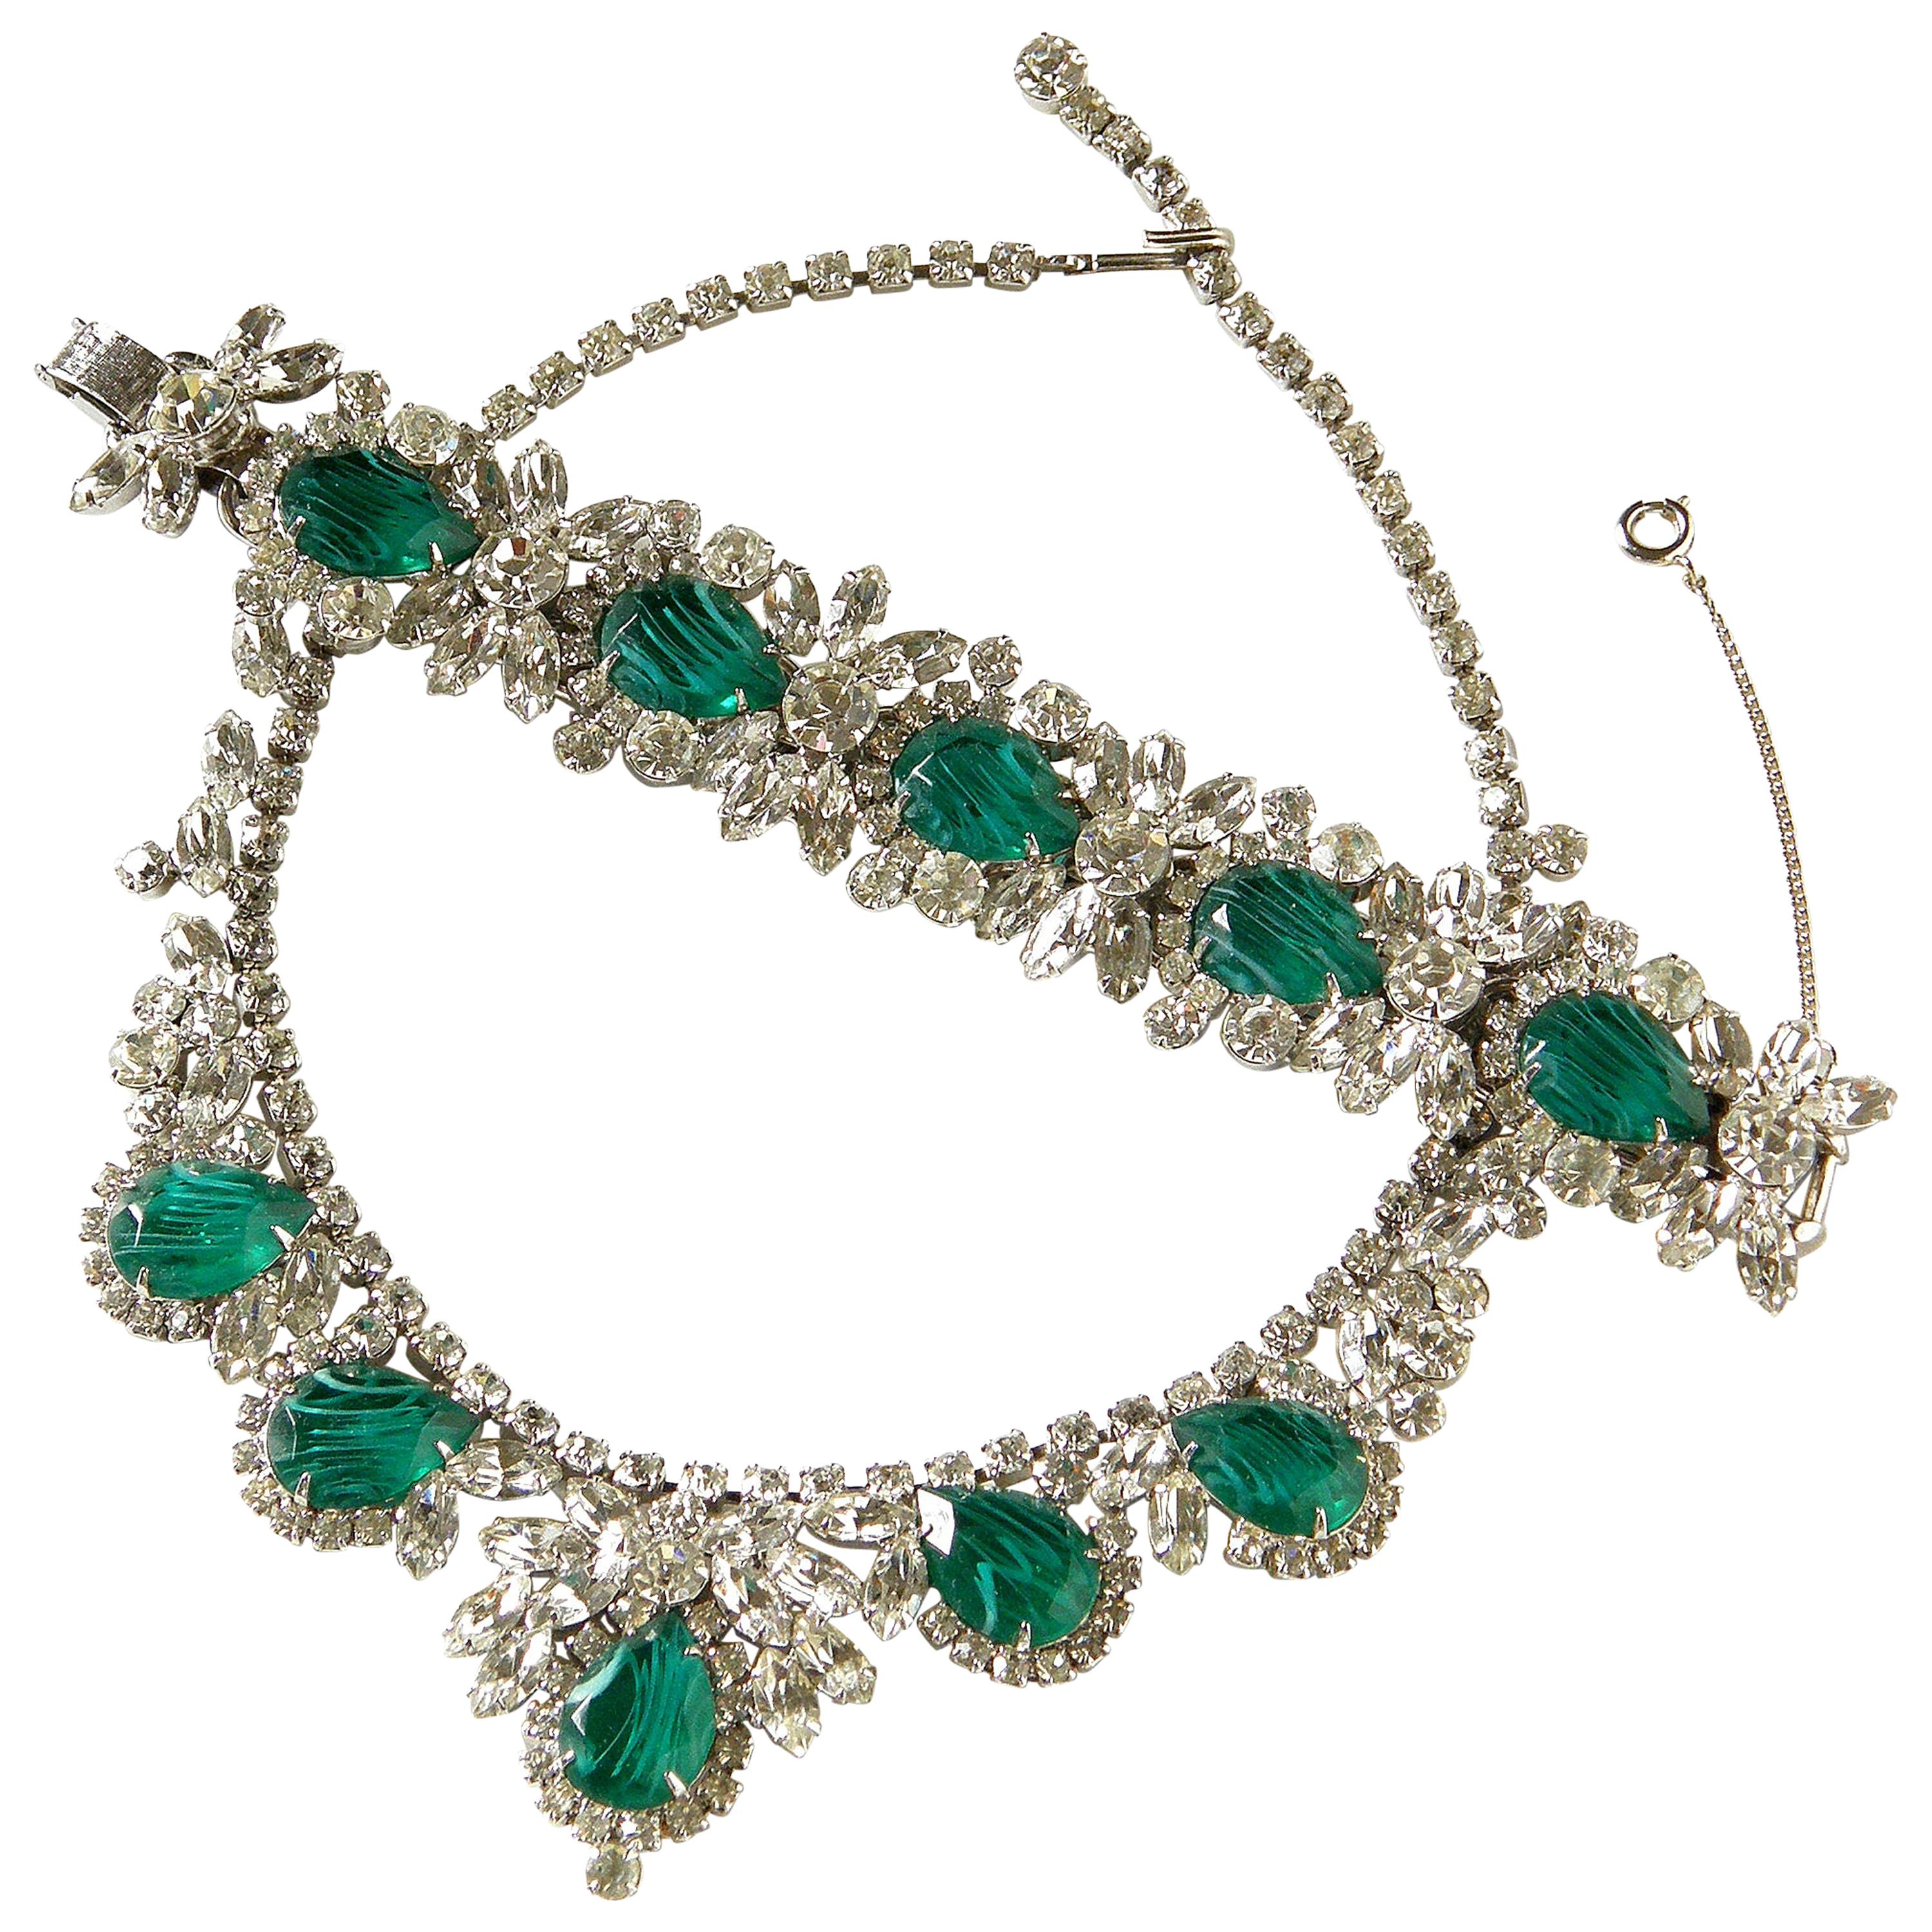 Juliana DeLizza & Elster Necklace and Bracelet with Faux Diamonds and Emeralds